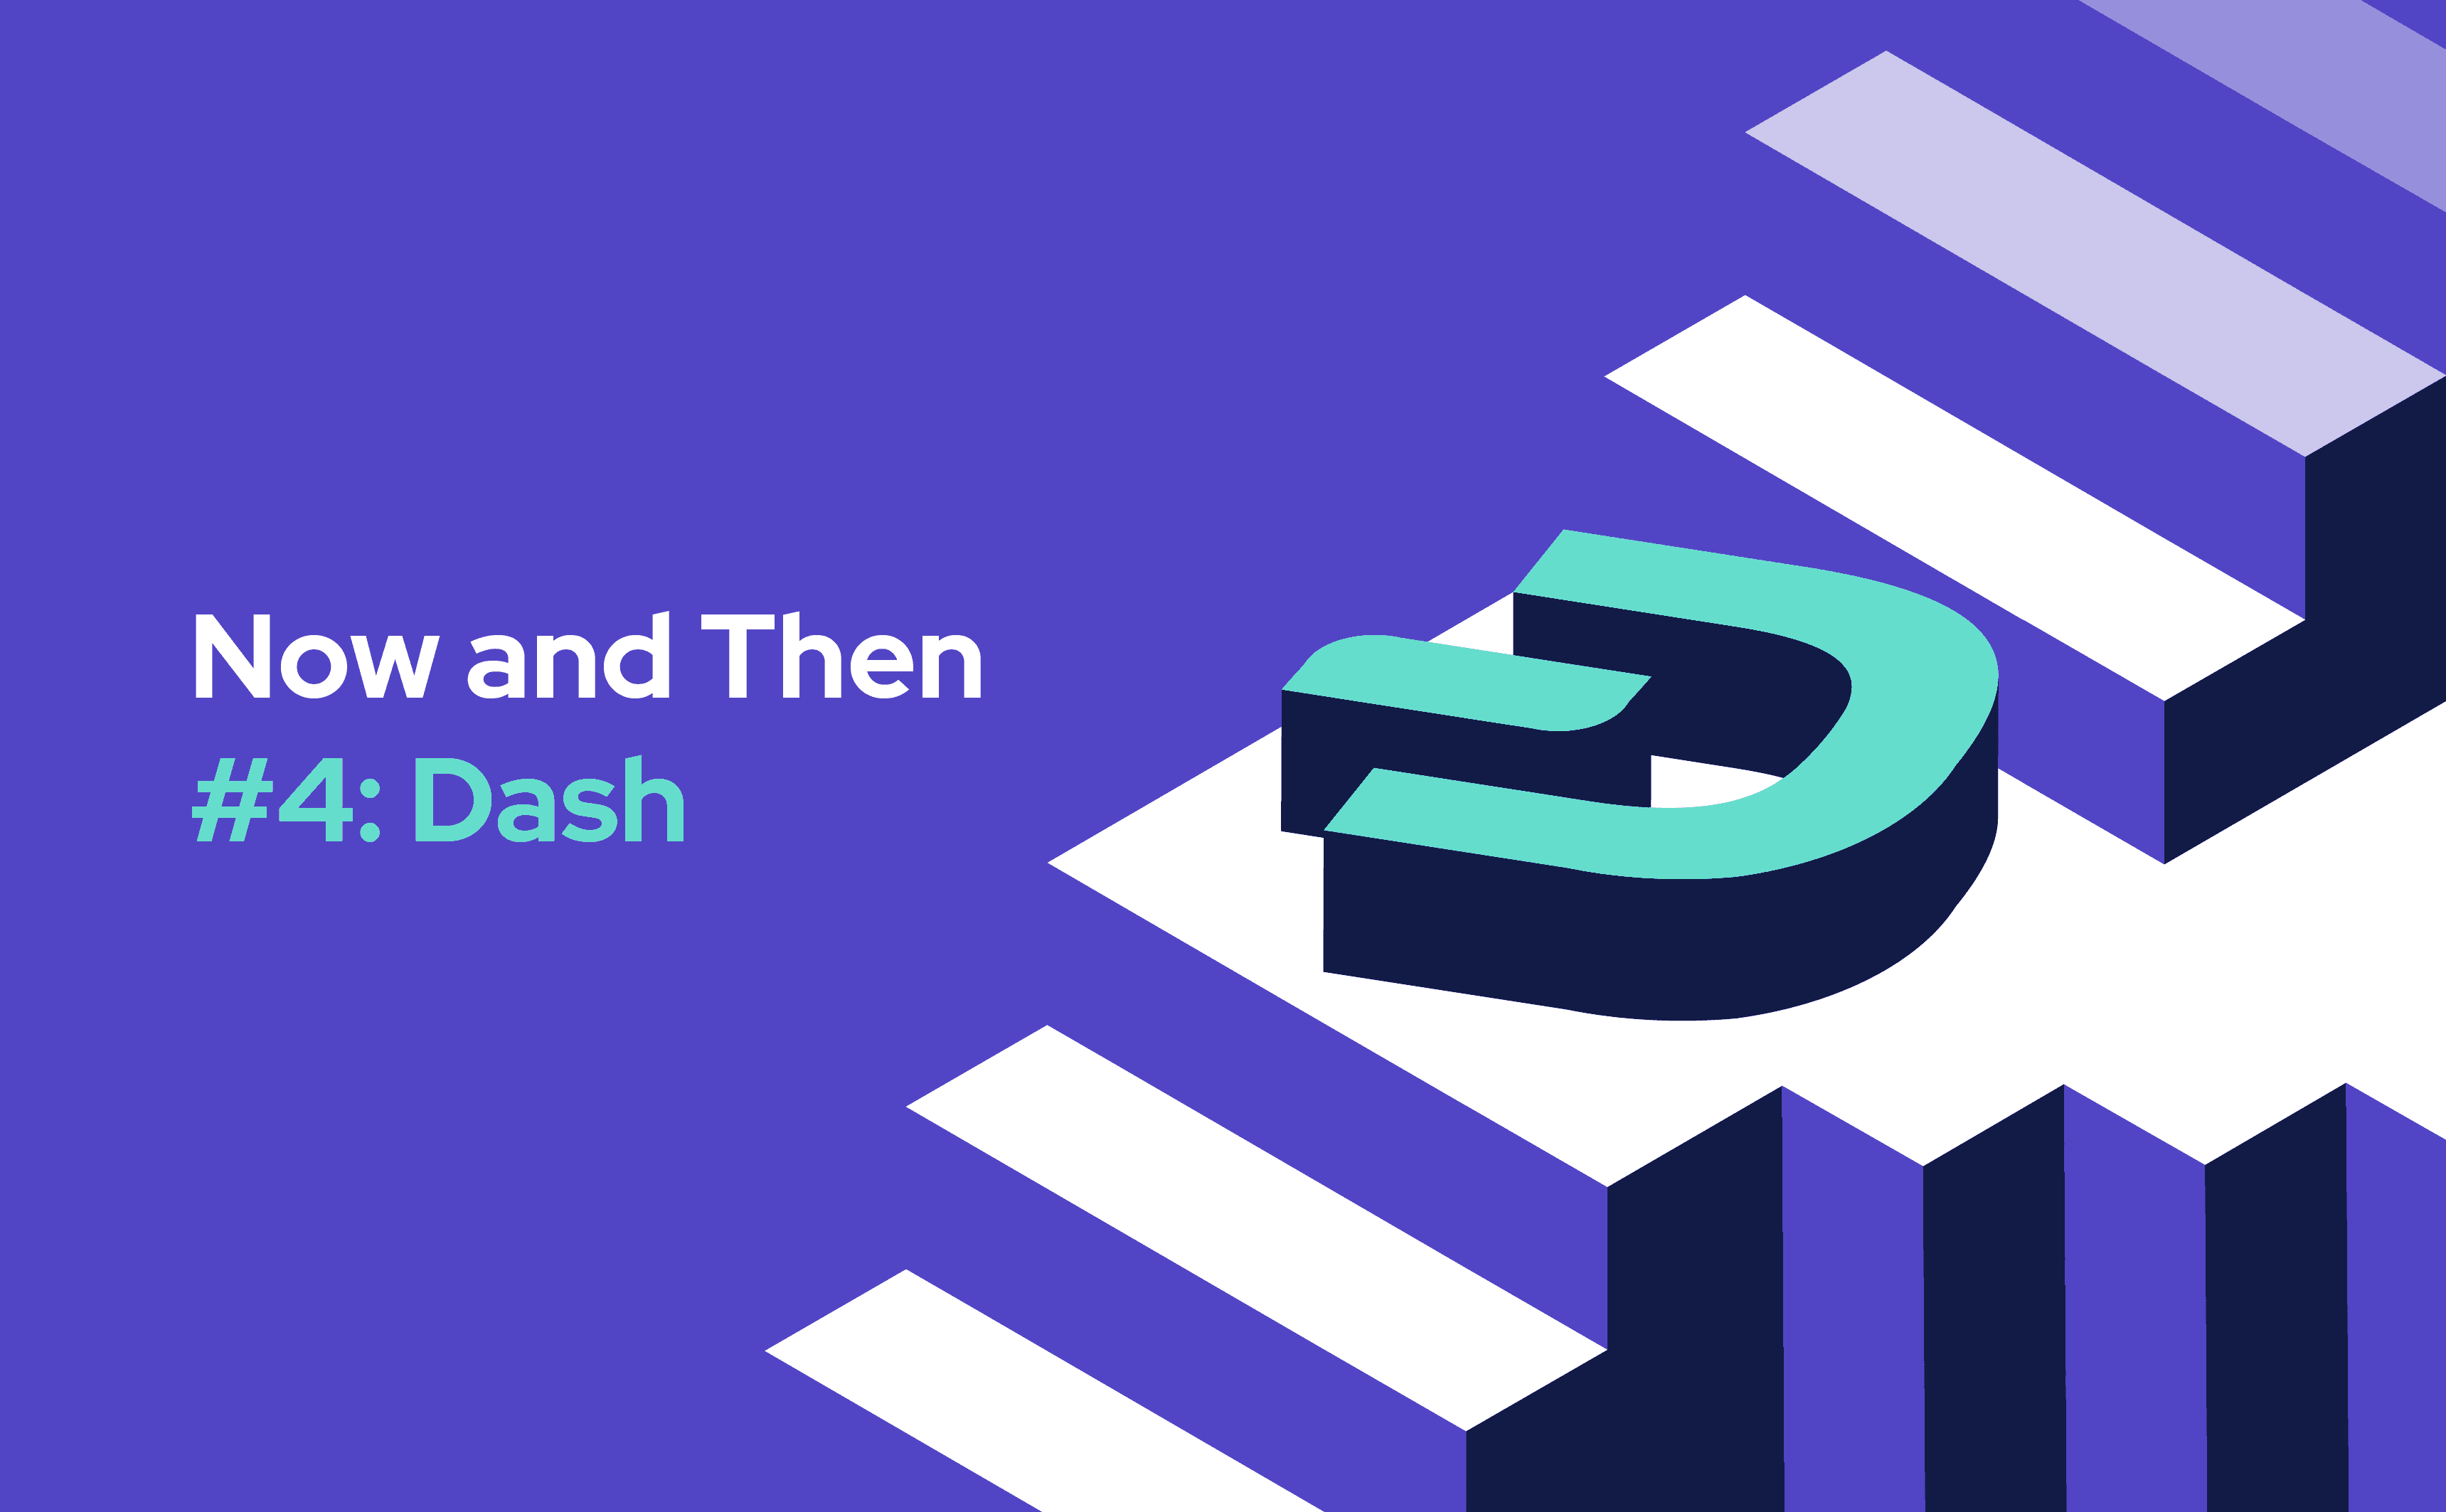 Dash has evolved significantly since 2014